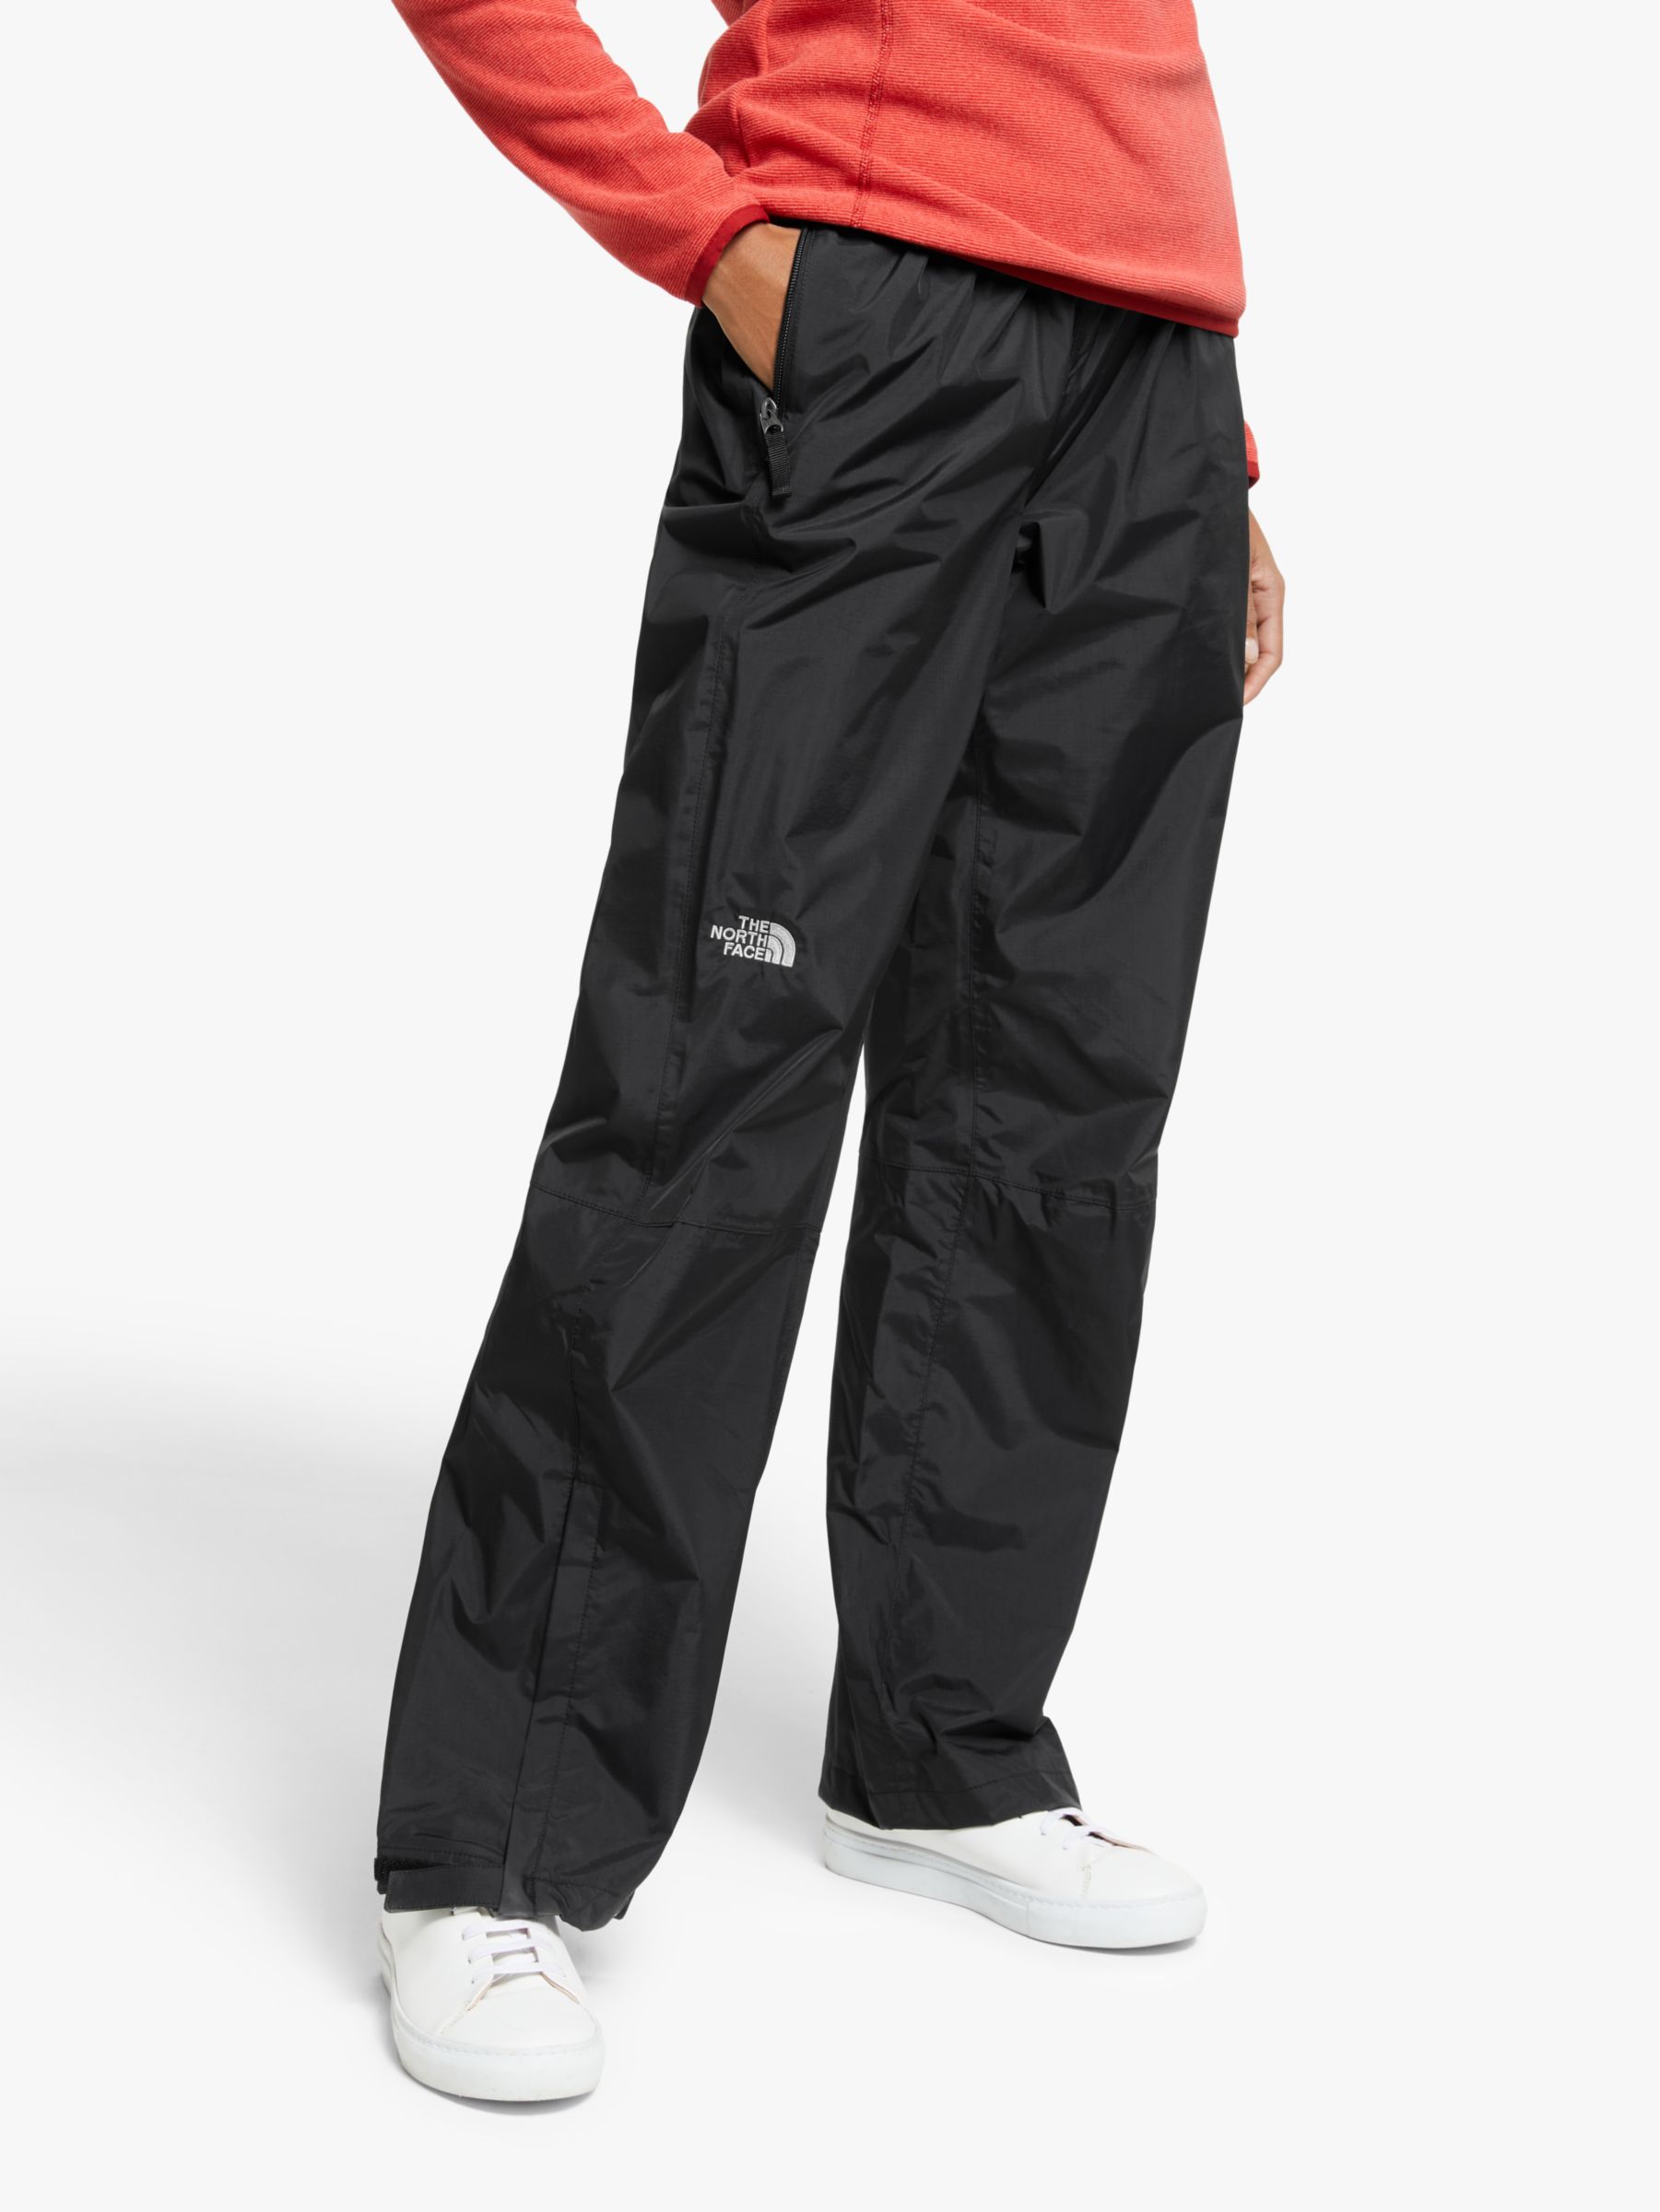 north face waterproof trousers mens